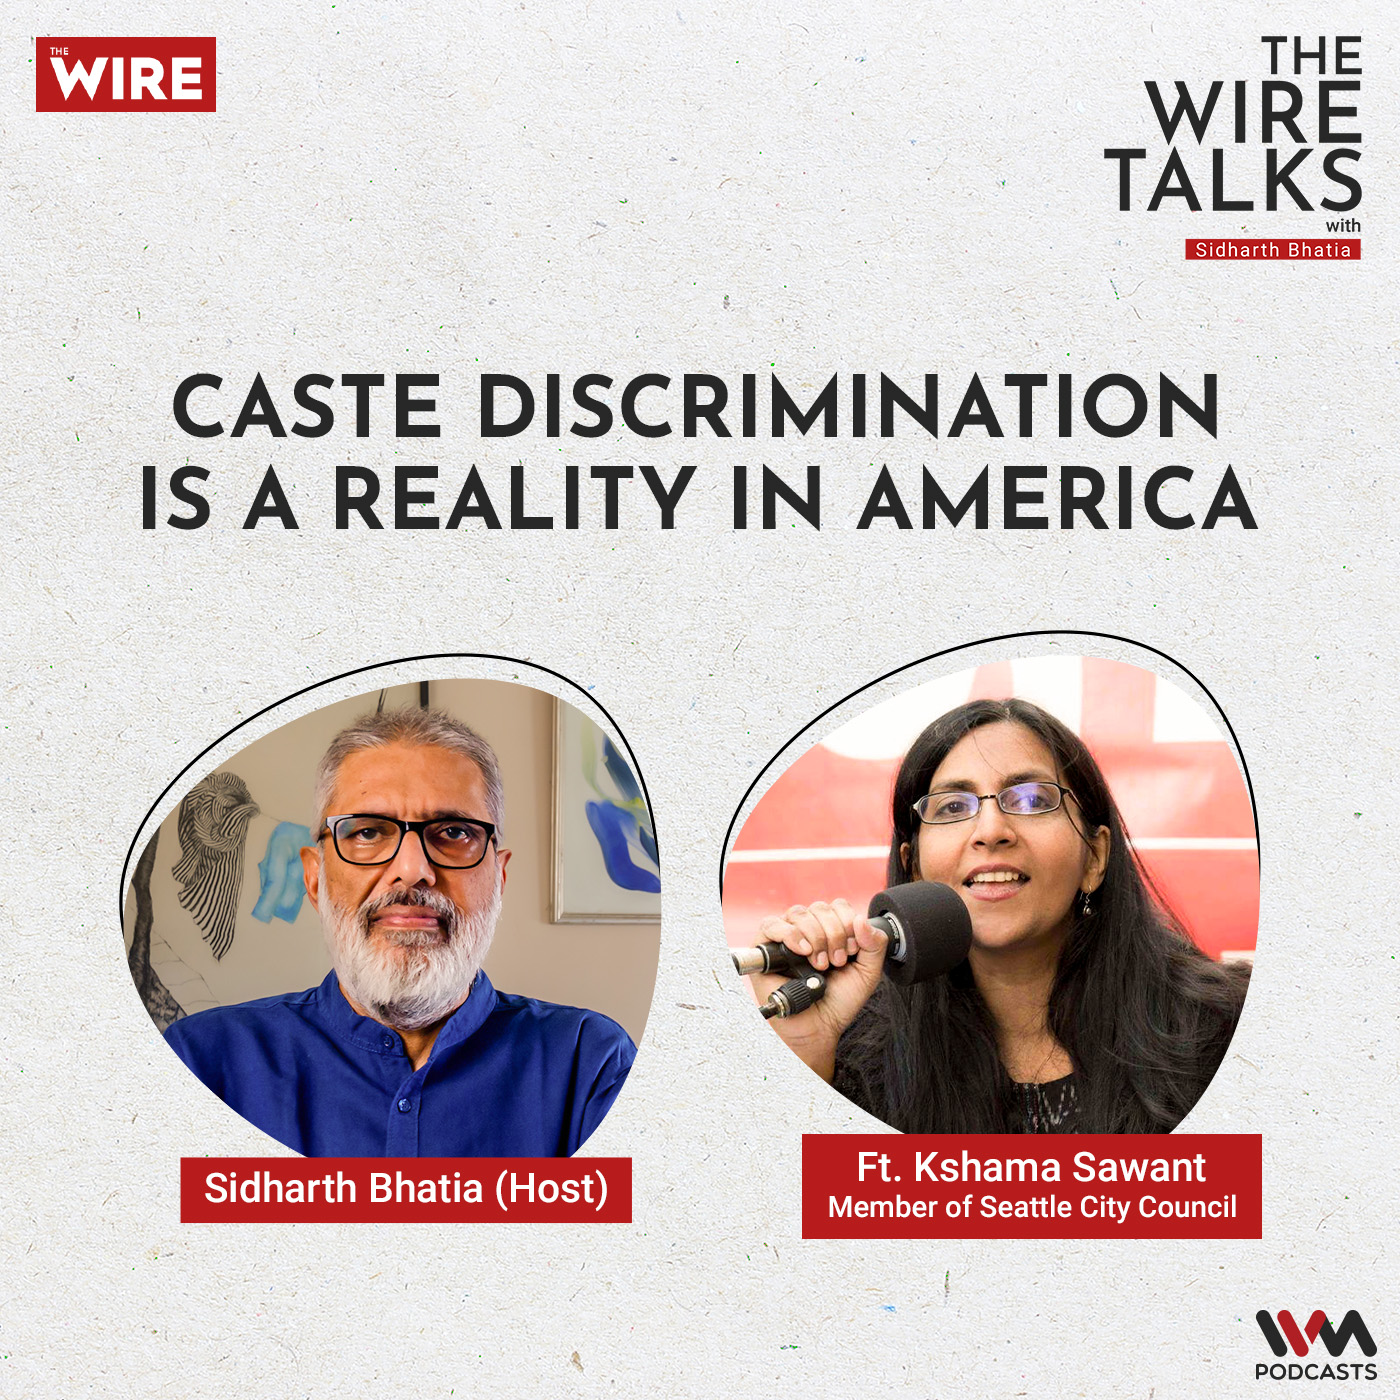 Caste discrimination is a reality in America Ft. Kshama Sawant